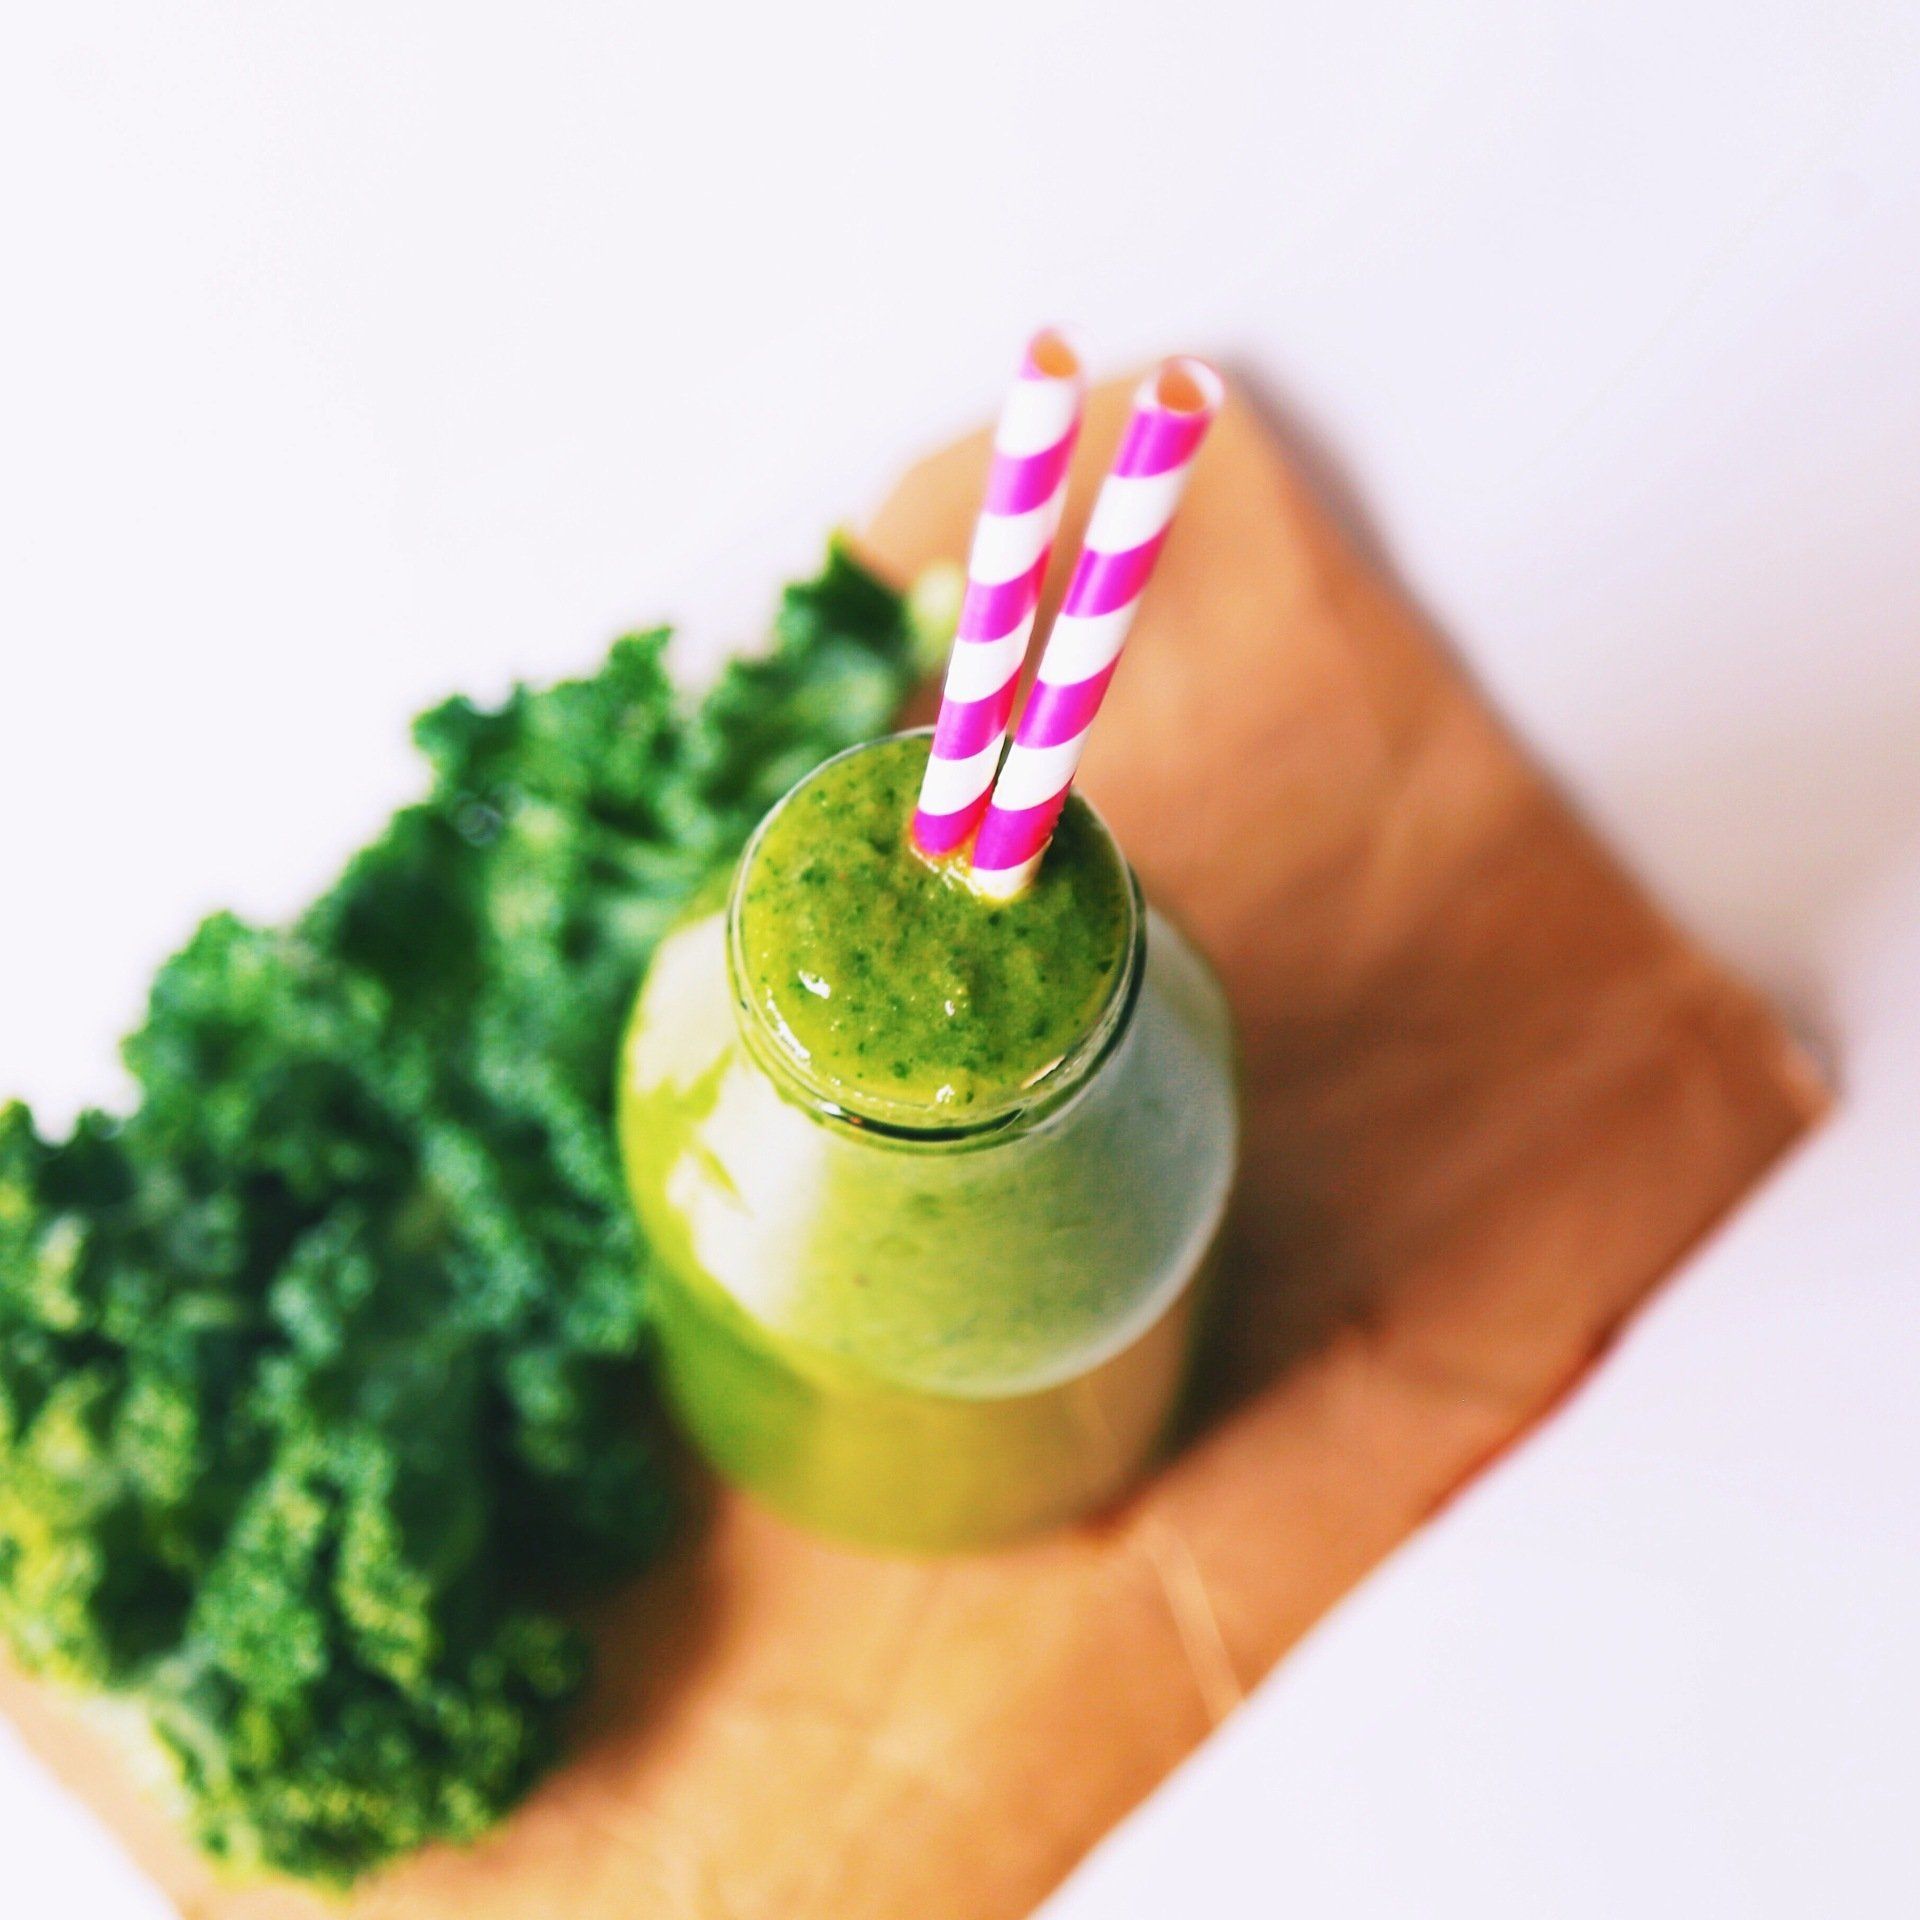 25 Tips for Making a Healthy Smoothie